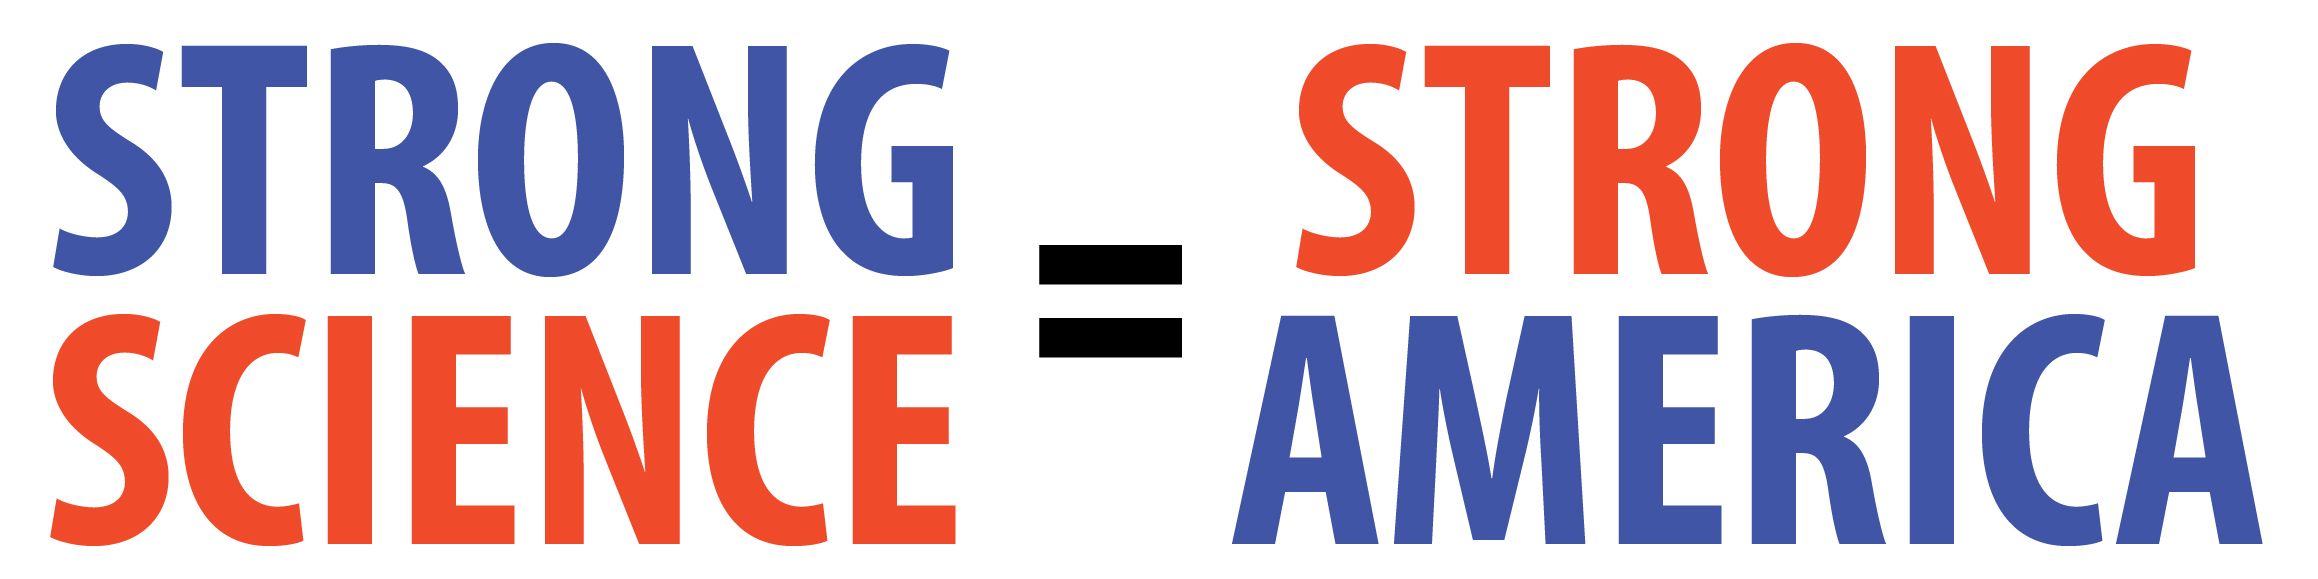 Strong Science = Strong America bumper sticker